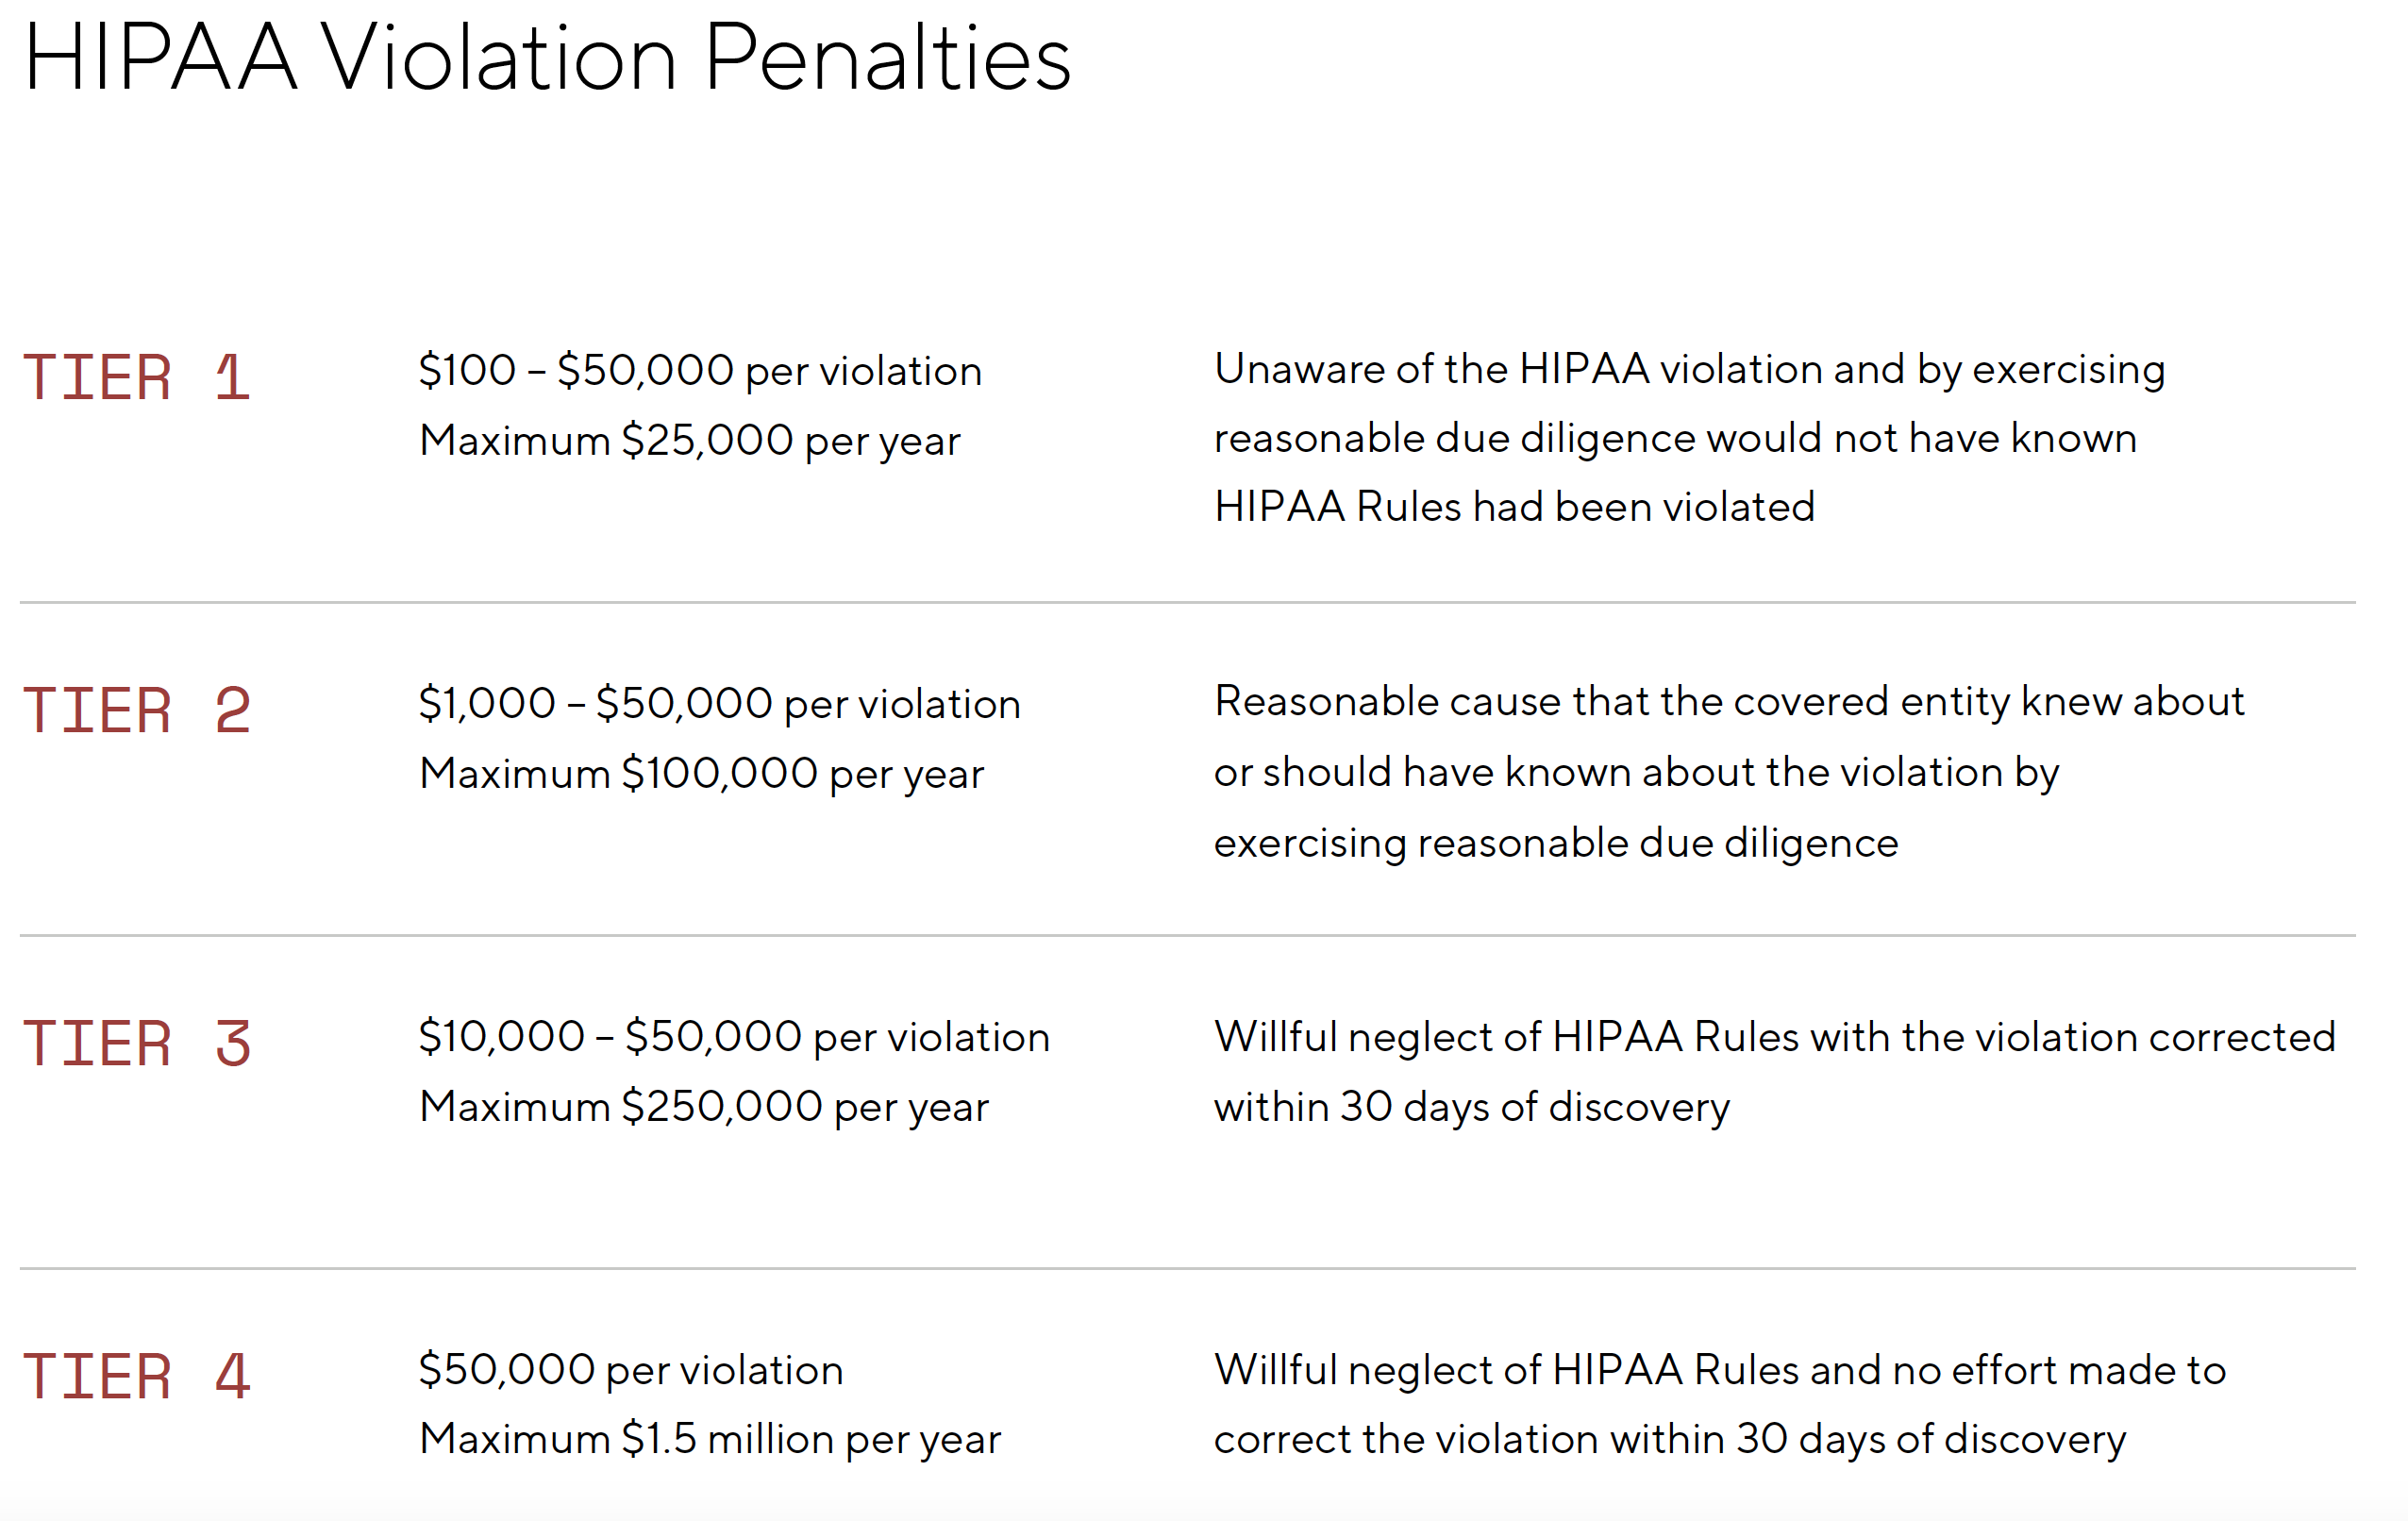 HIPAA Violation Penalty Conditions and Amounts